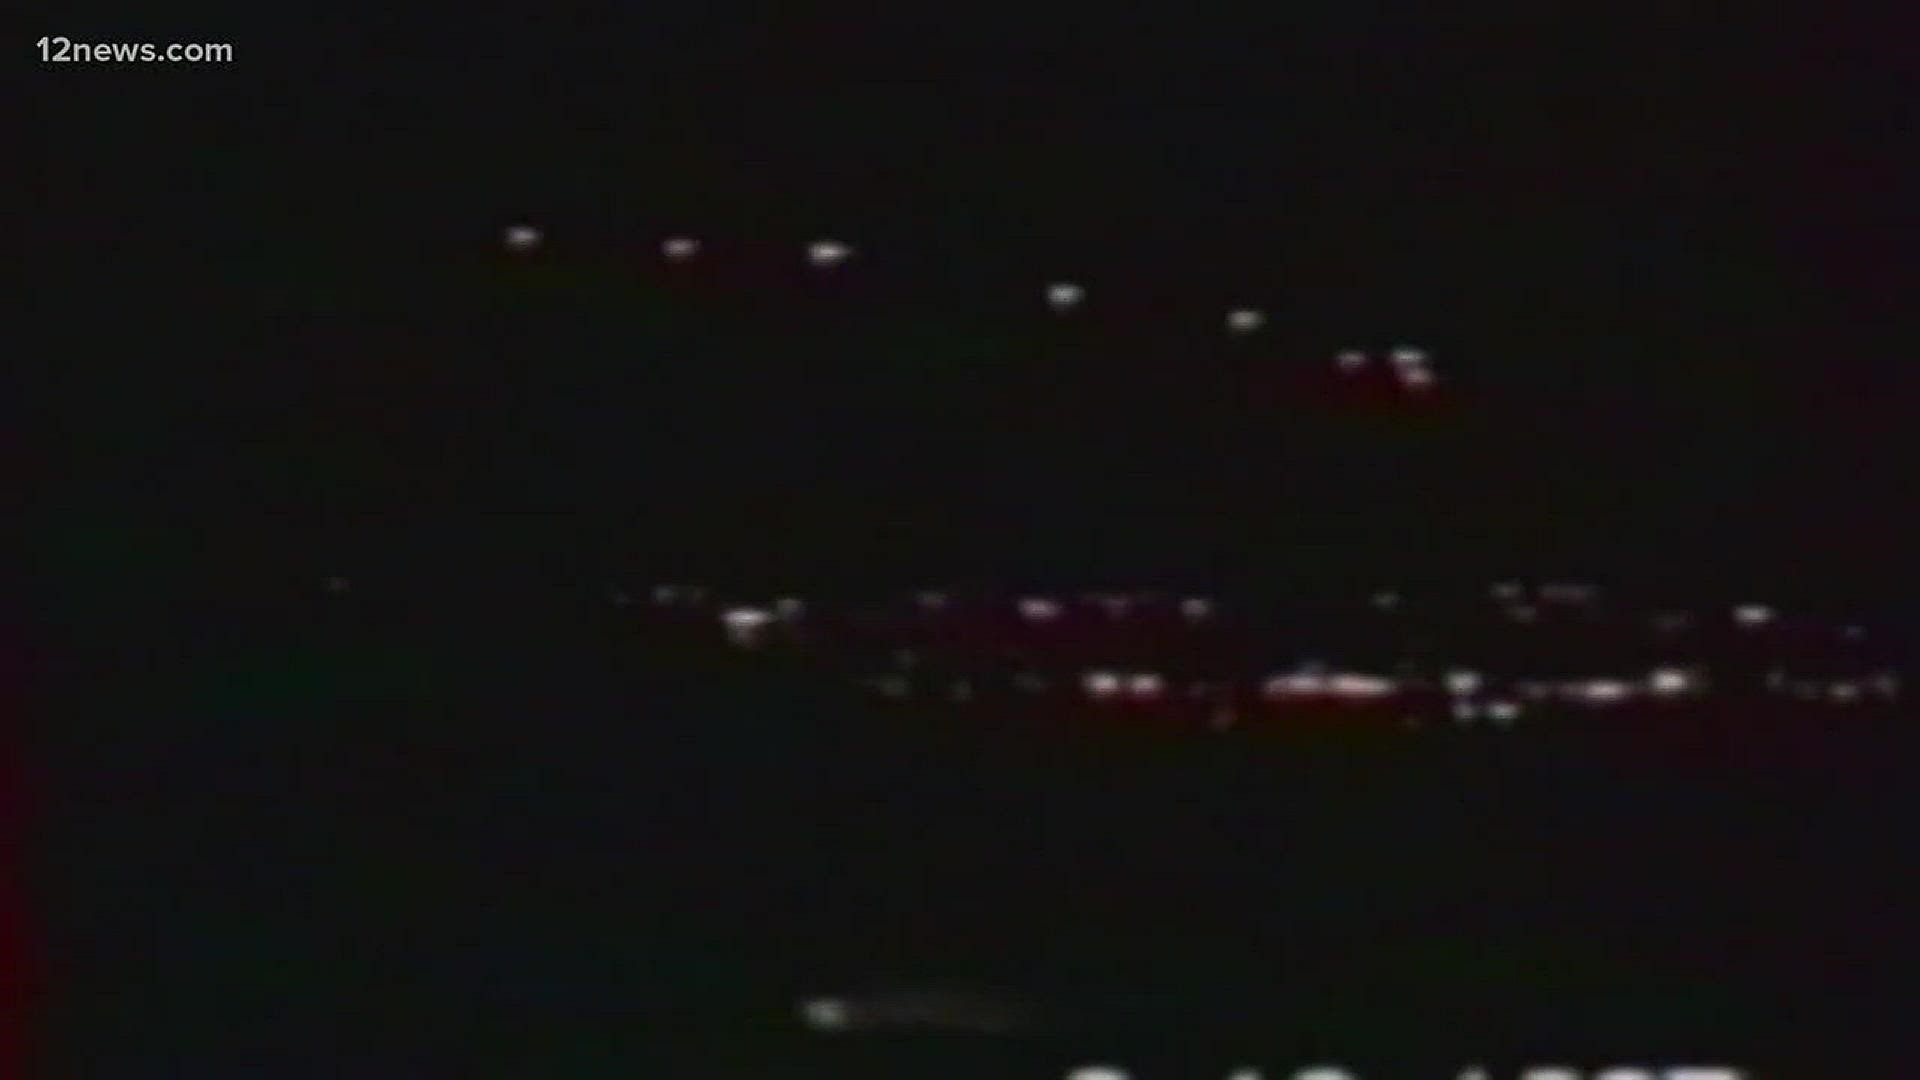 The mysterious lights were first seen back in 1997.